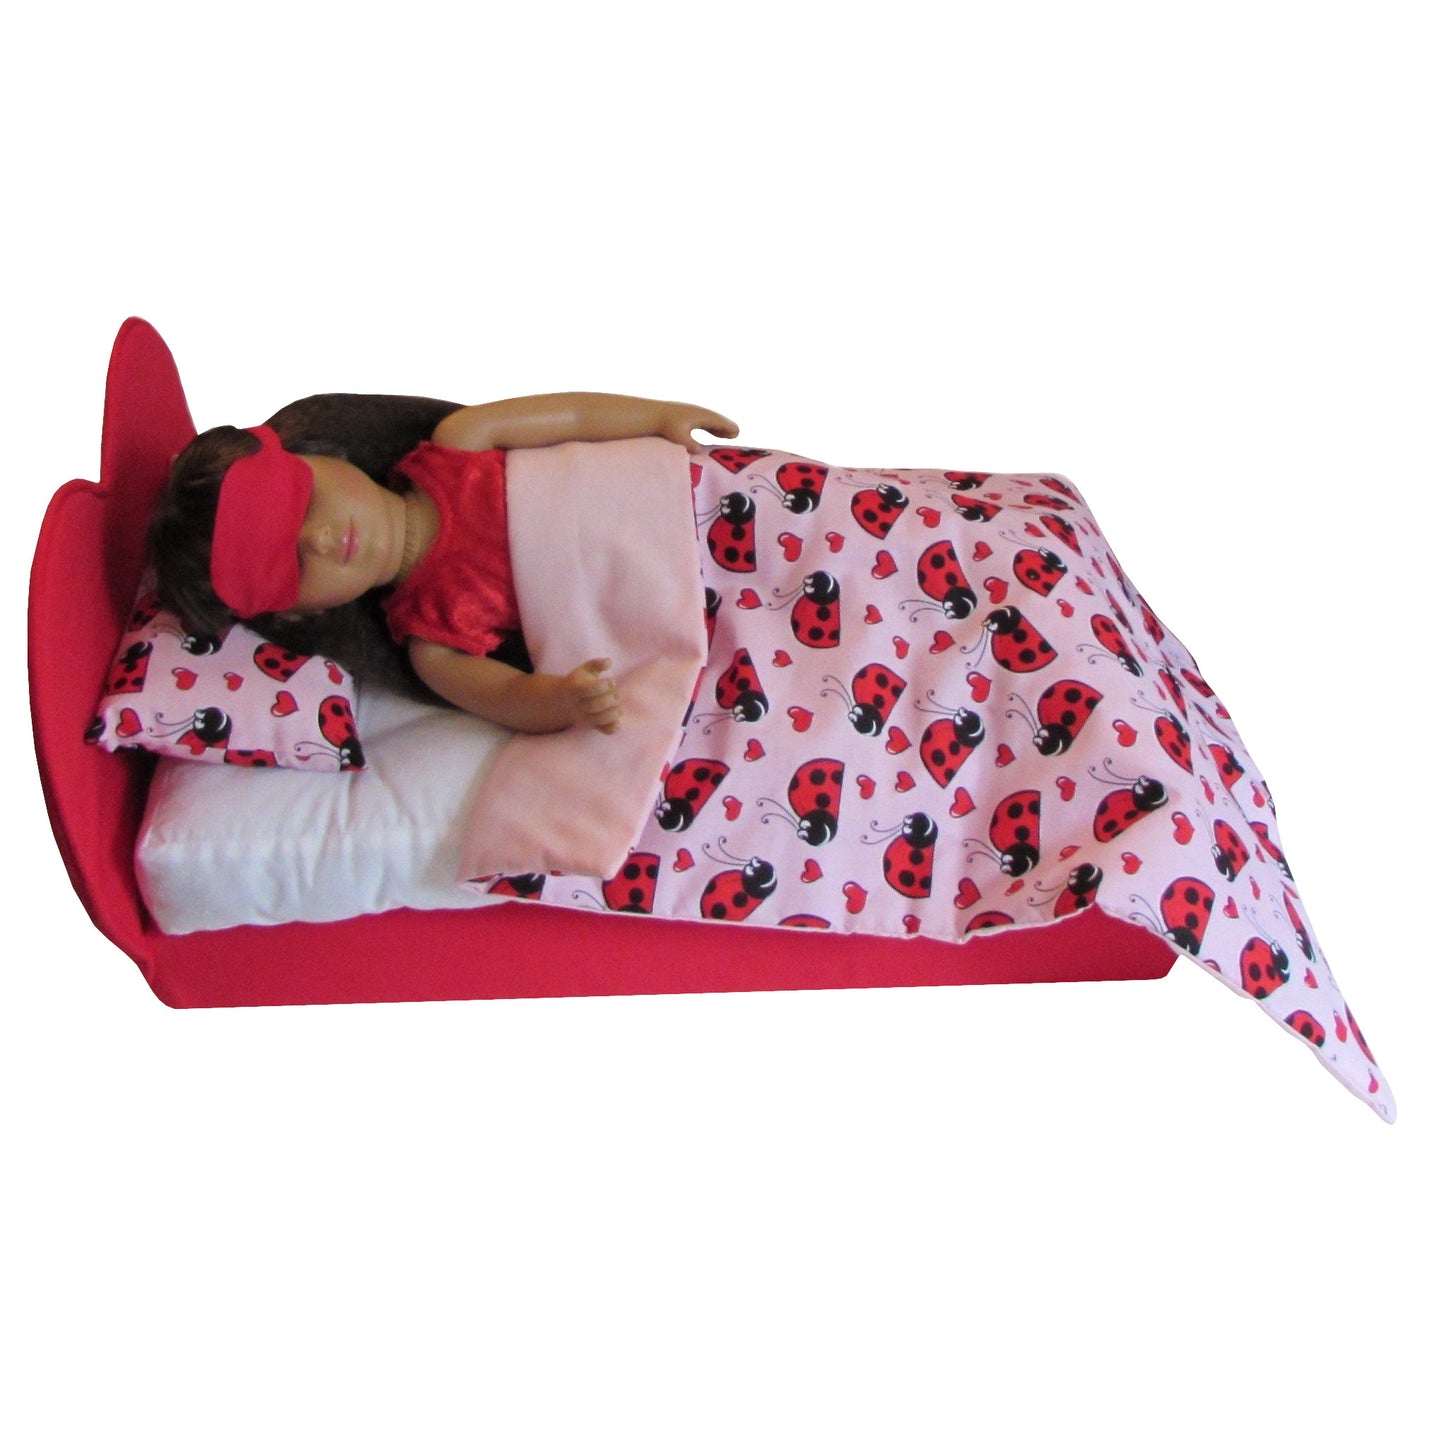 Red Doll Sleep Mask for 18-inch dolls